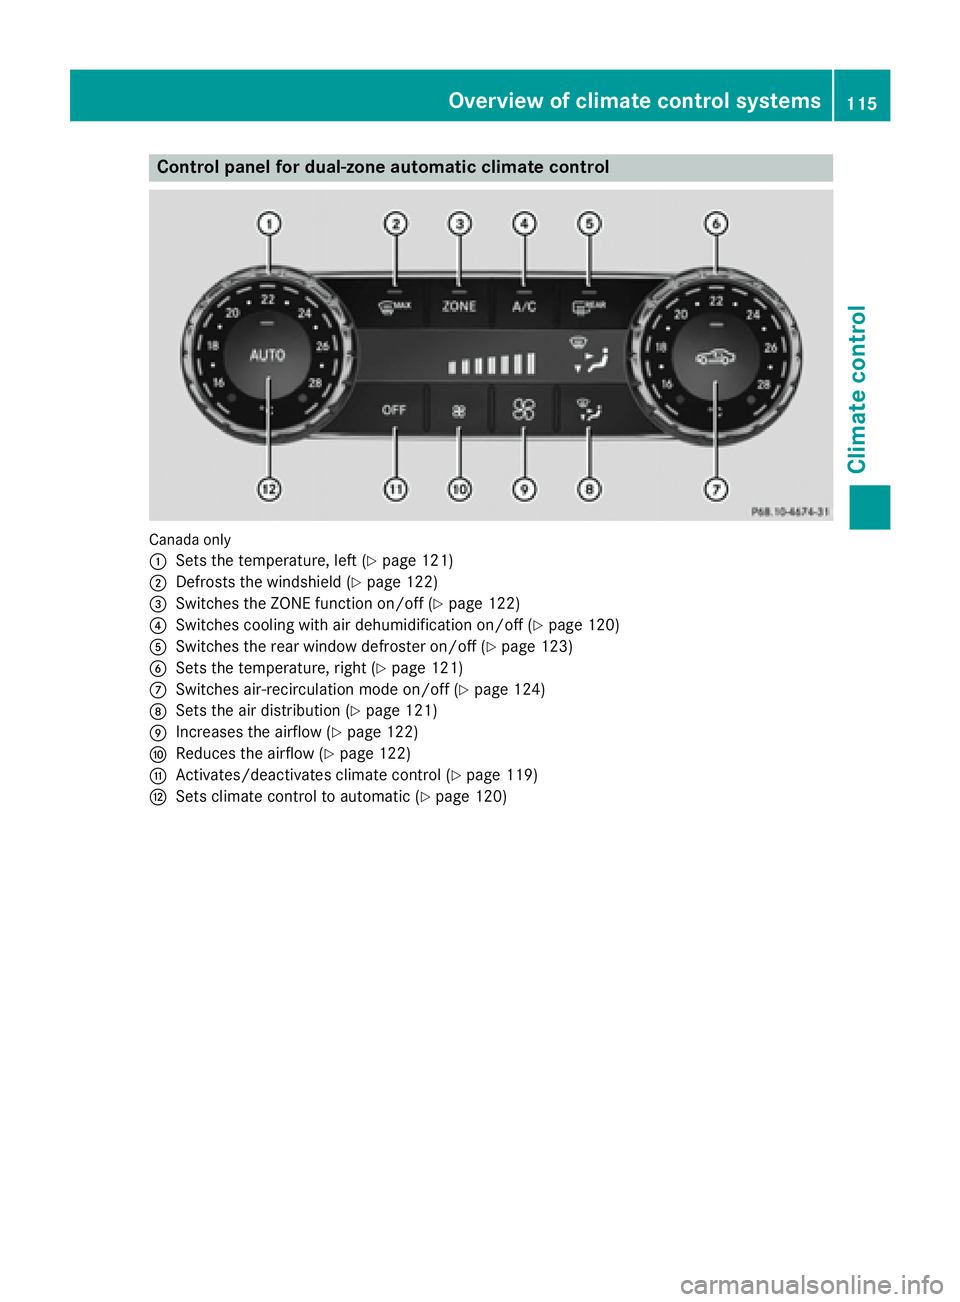 MERCEDES-BENZ CLS 2016  Owners Manual Control panel for dual-zone automatic climate control
Canad a only
�C
Sets the temperature, left ( Y
page 121)�D
Defrosts the windshield ( Y
page 122)�